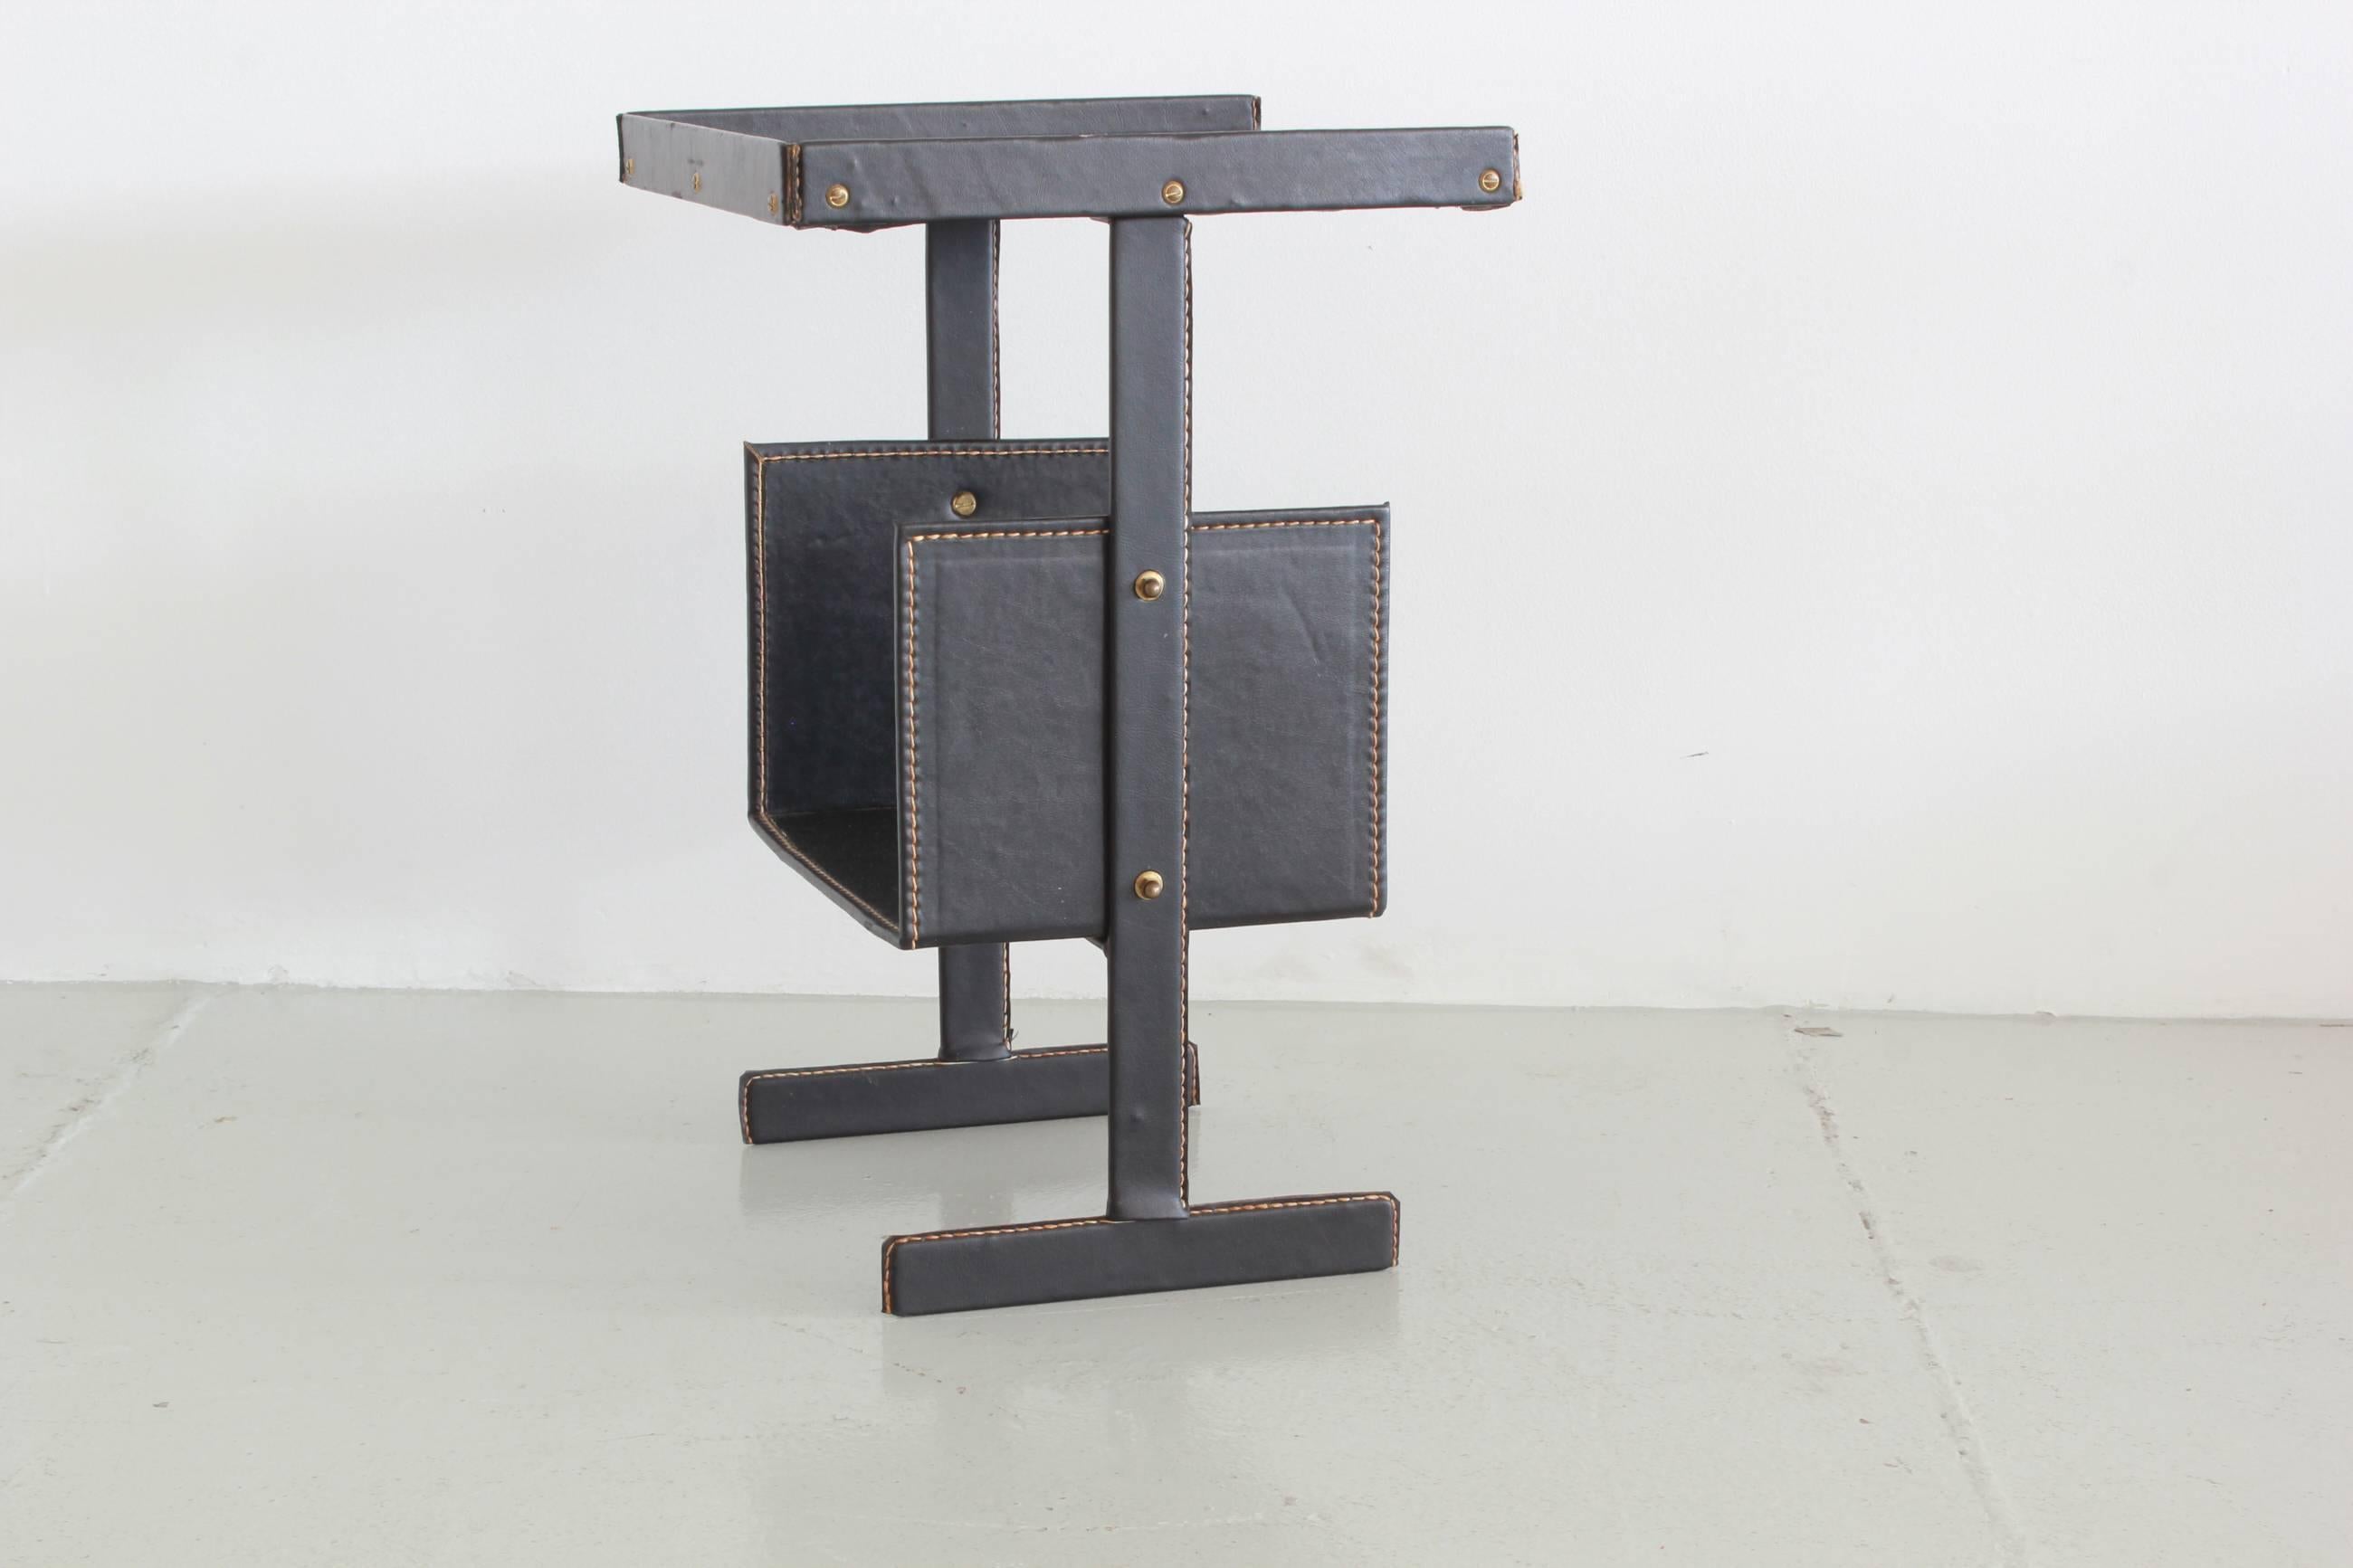 Leather wrapped side table with brass hardware and contrast saddle stitching by French designer Jacques Adnet. This table was originally designed as a telephone table, but works great as a side table next to a chair or sofa with a shelf for storage.